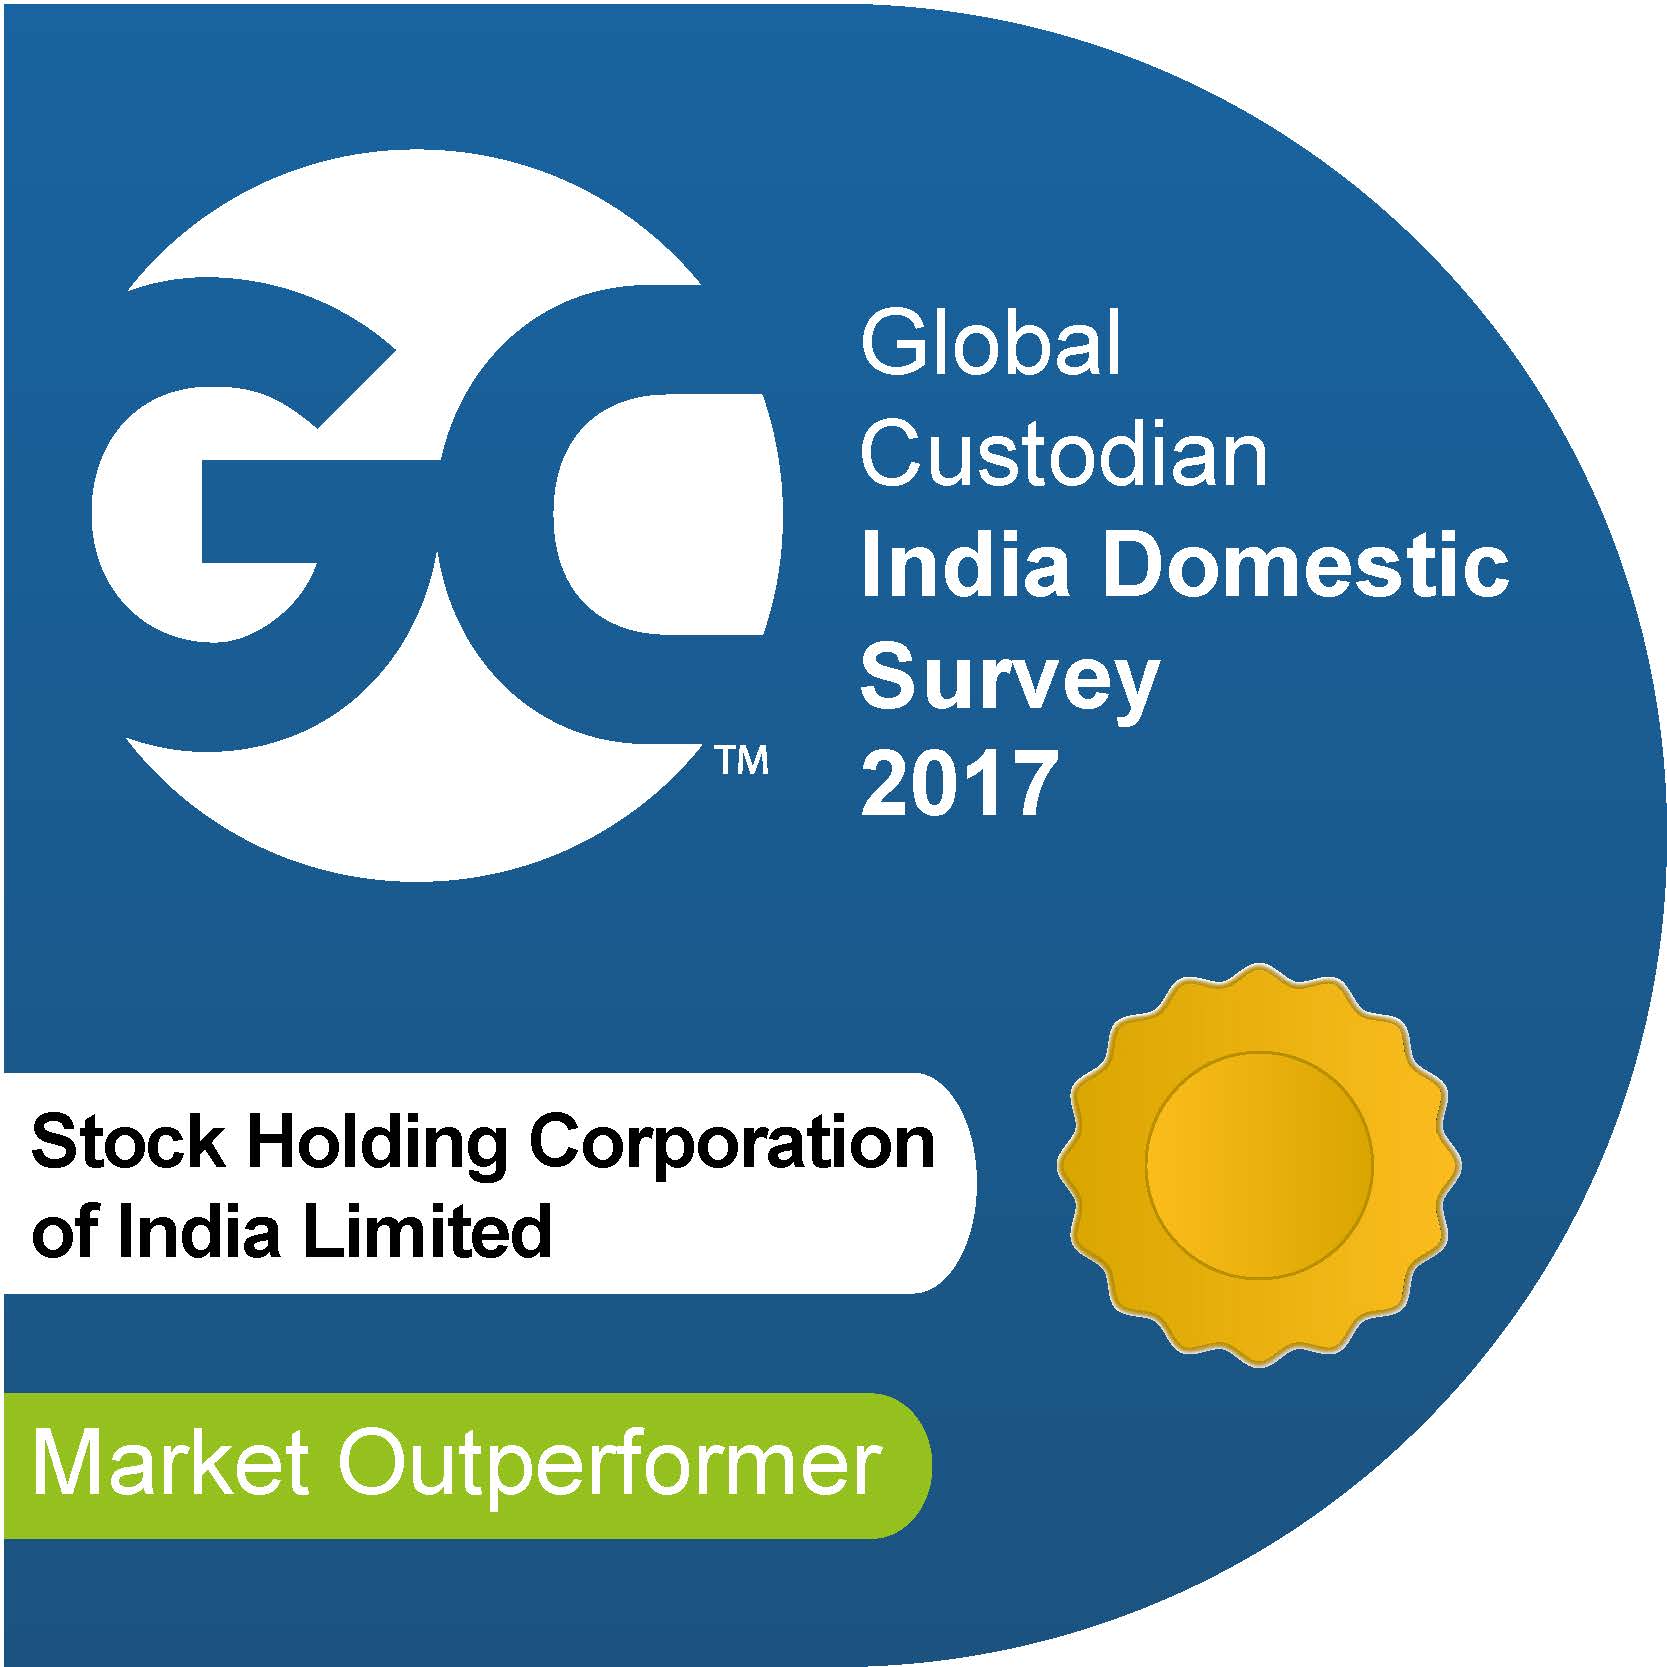 StockHolding Corporation Of India Limited BEST CUSTODIAN BUSINESS EXCELLENCE